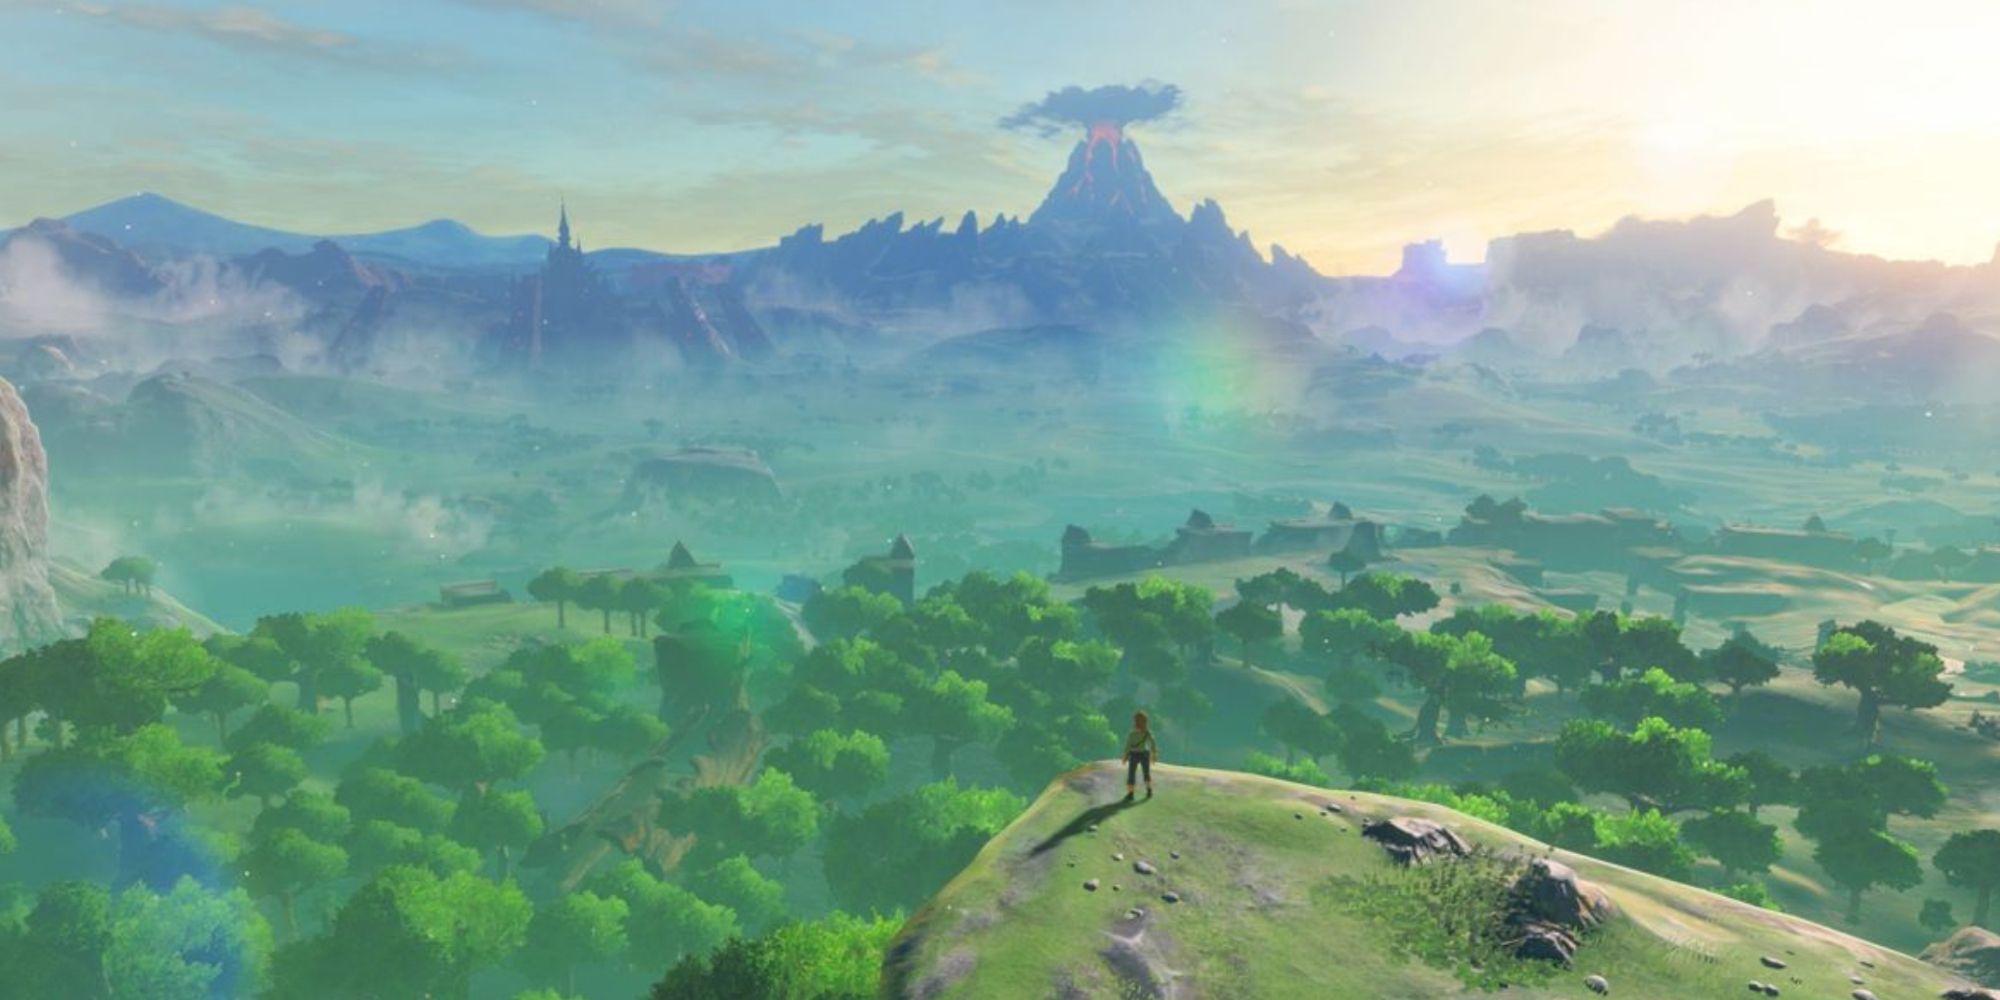 Link starring out at Hyrule from the edge of the Great Plateau in The Legend of Zelda: Breath of the Wild